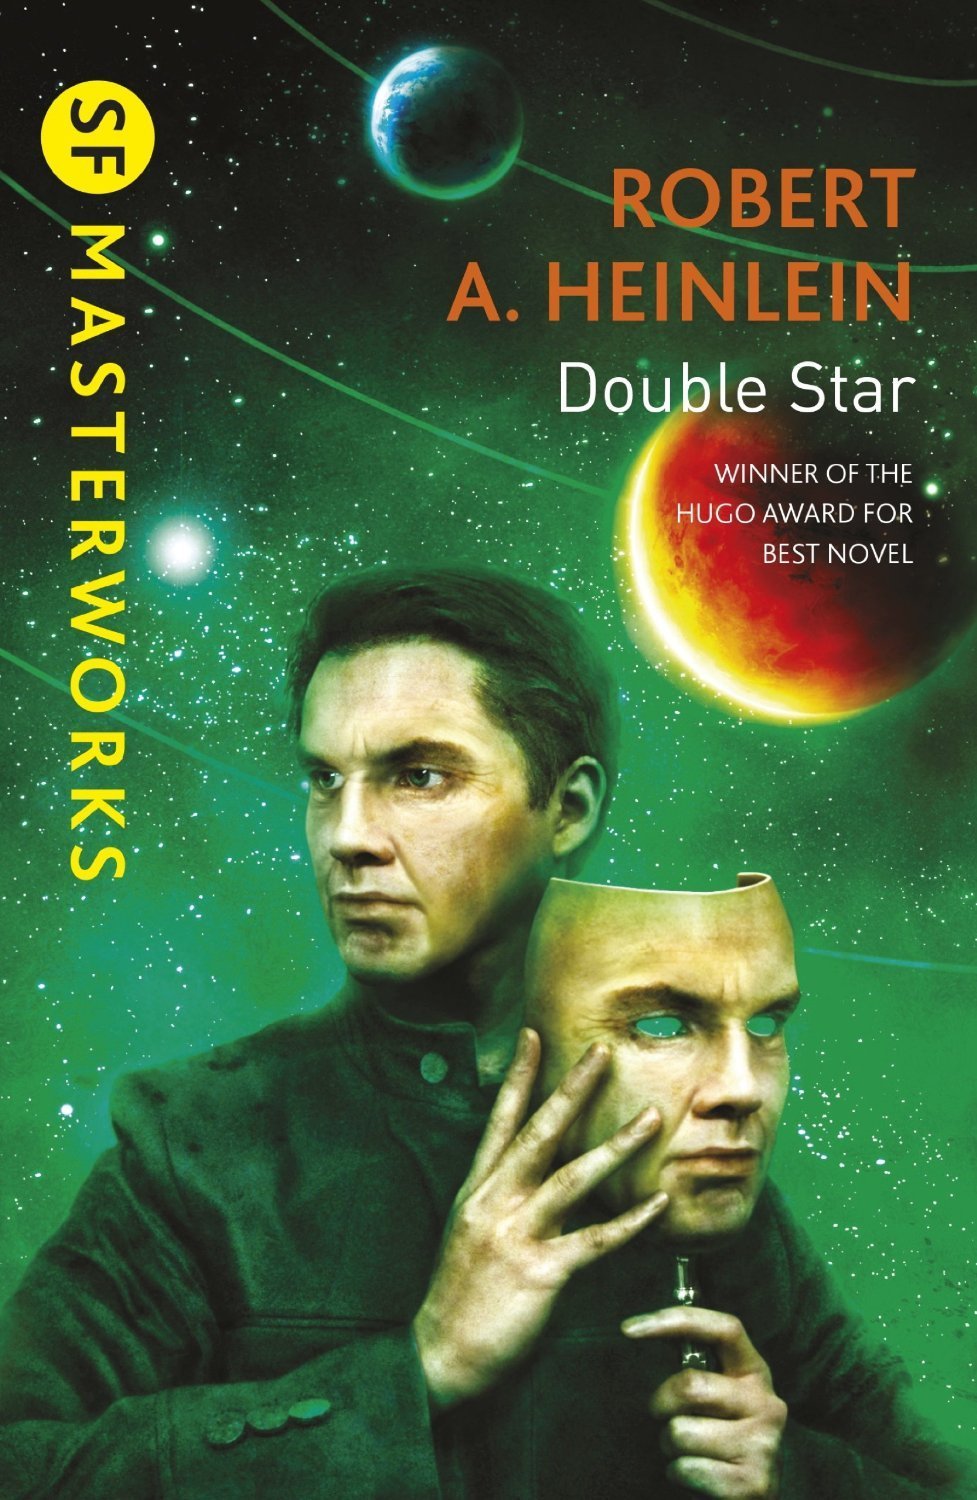 “Double Star” book cover